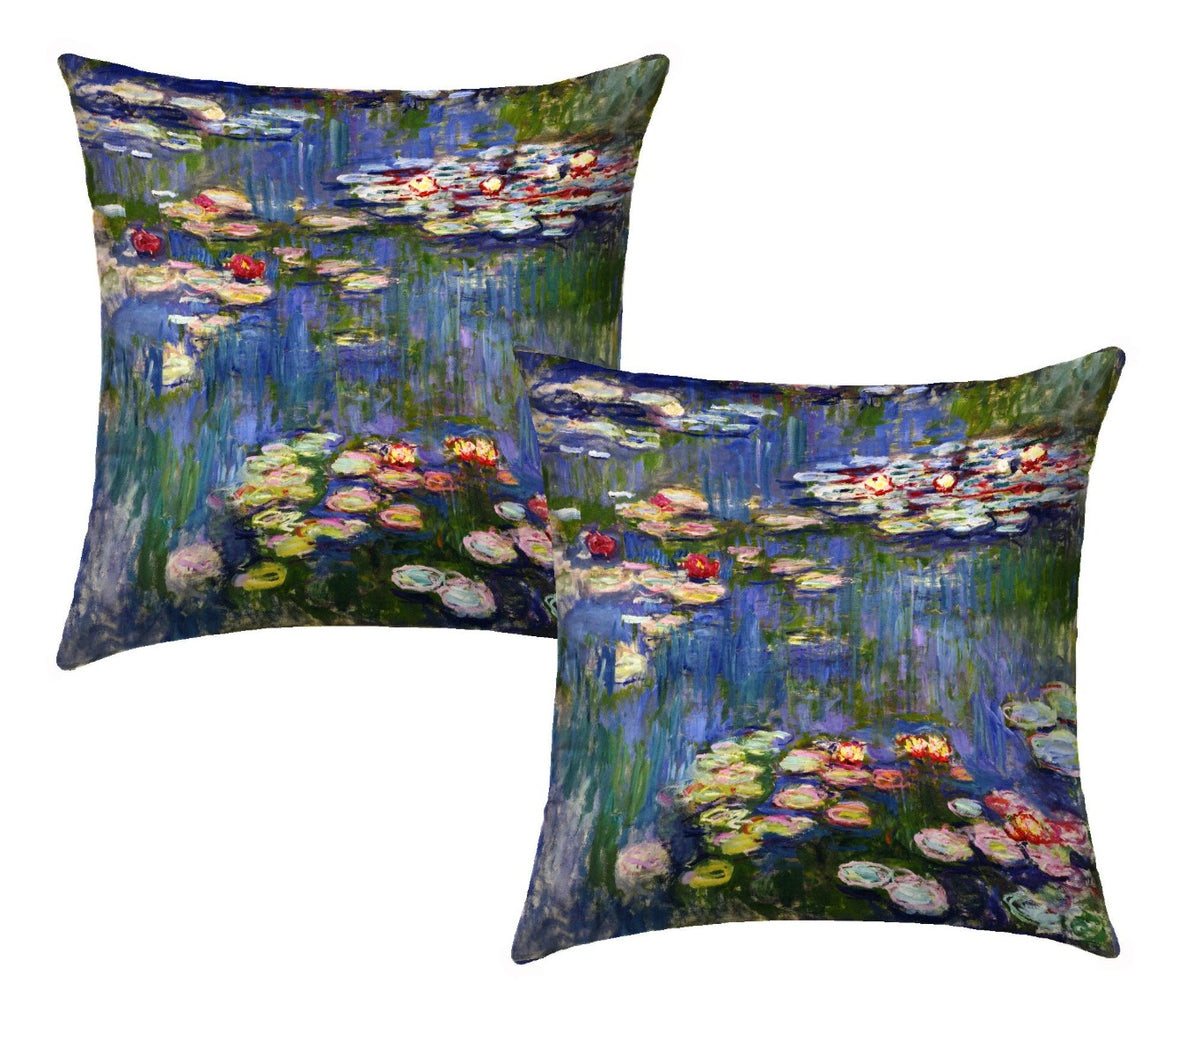 Pair of Cushion Covers - Water Lilies - Monet